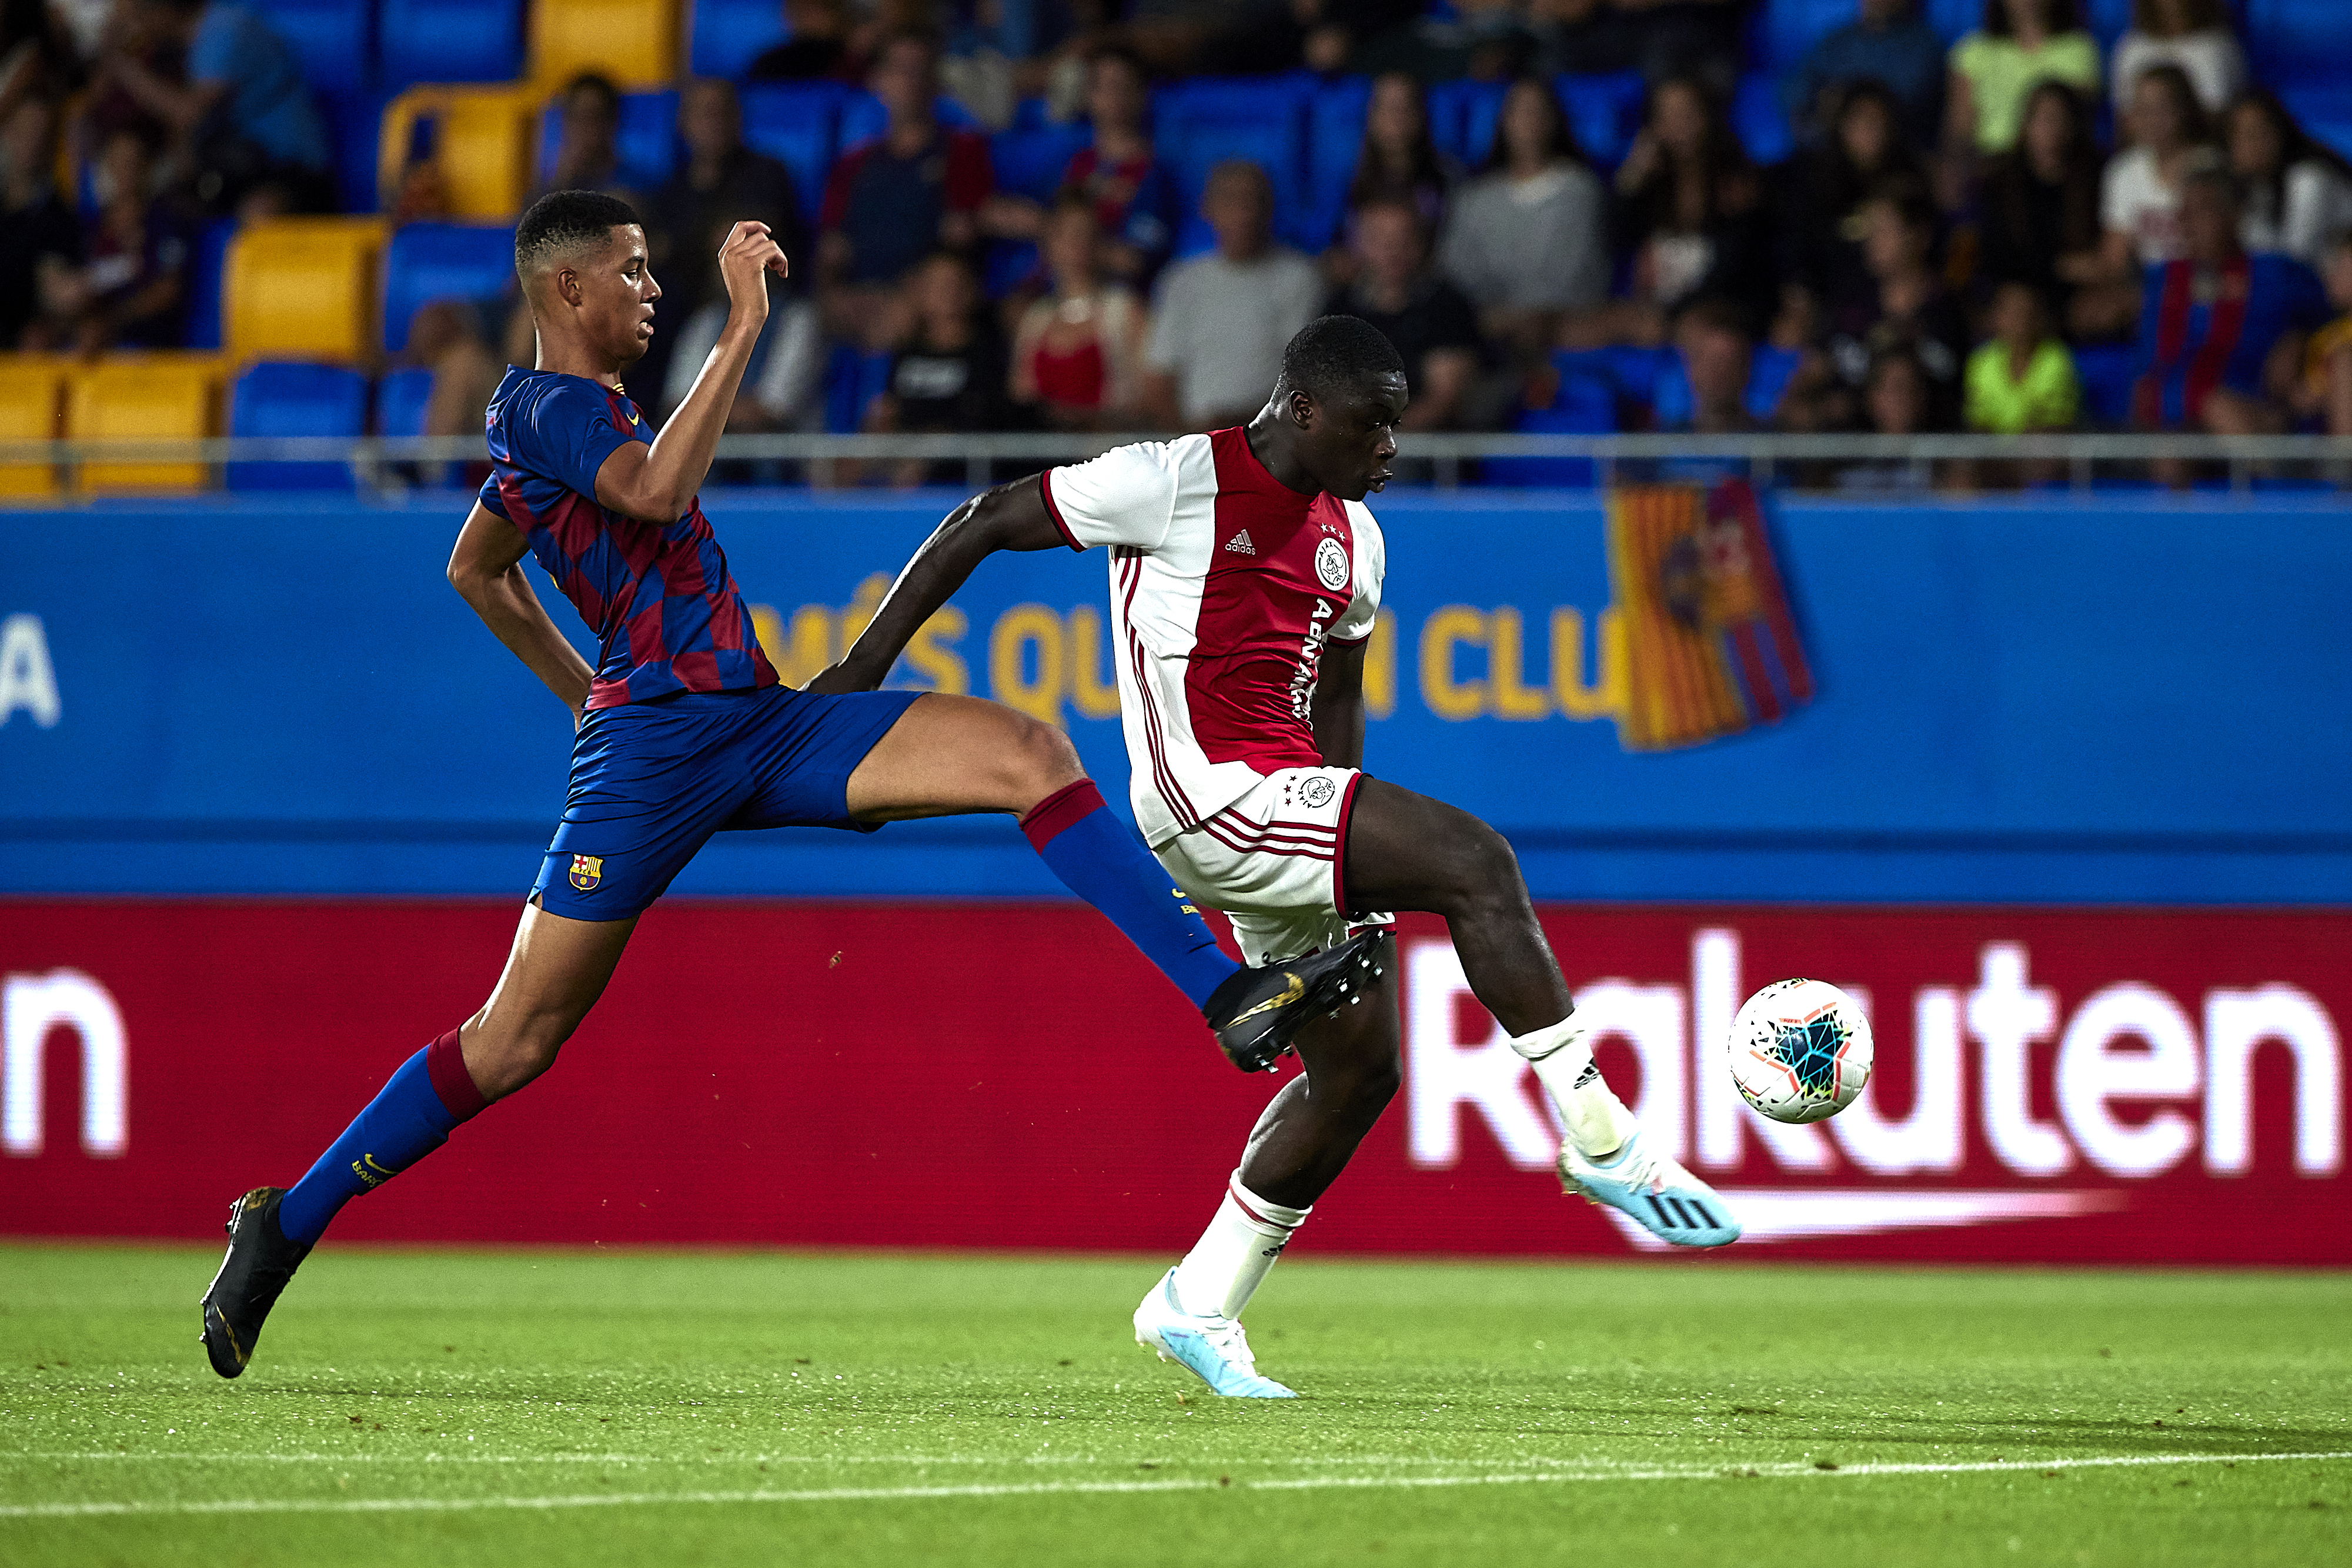 , Ex-Chelsea defender Xavier Mbuyamba has been called the ‘new Van Dijk’ and was schooled by Barca at La Masia academy